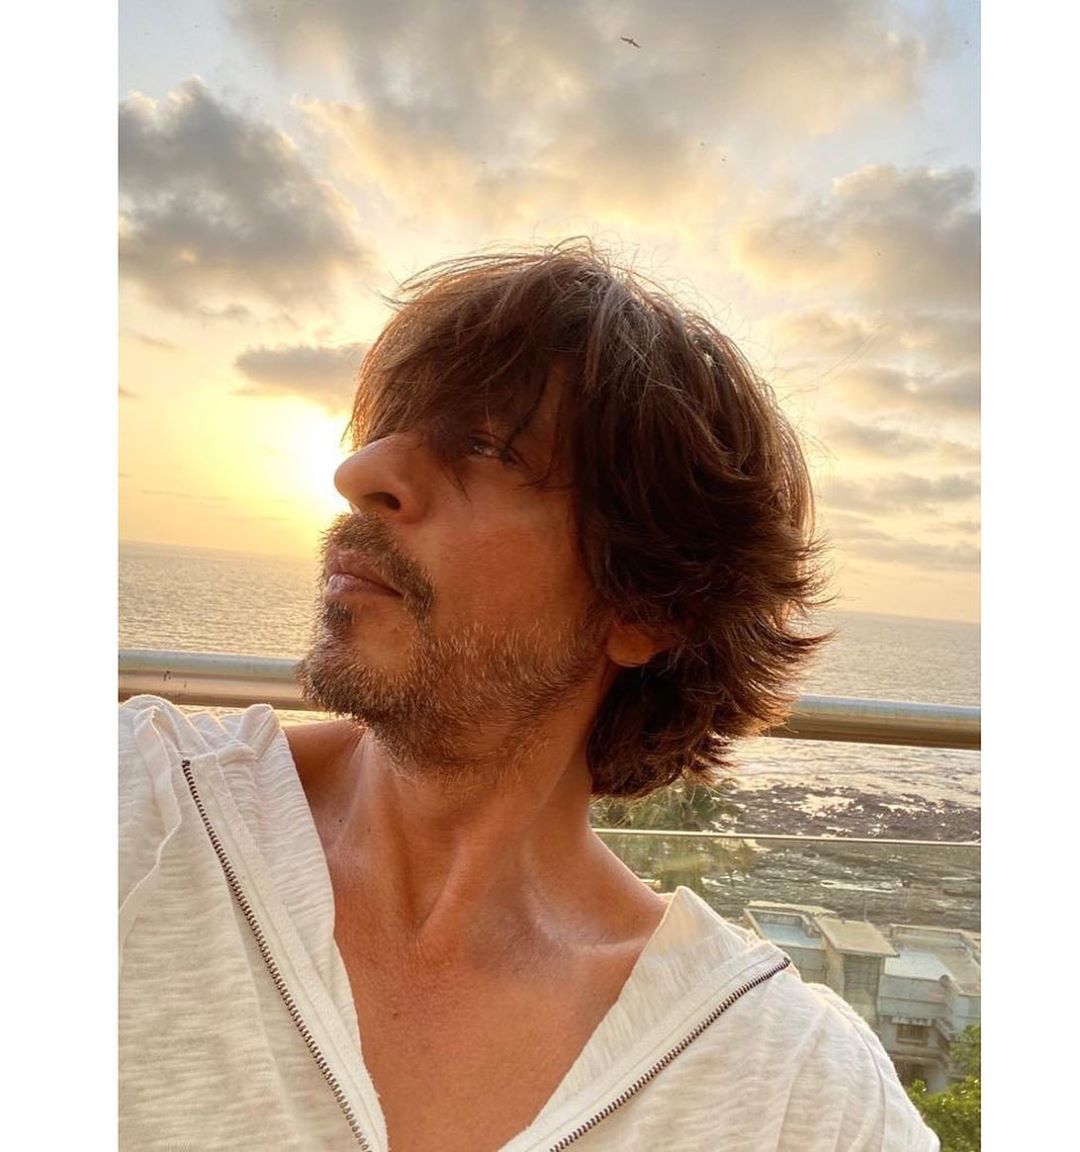 Shah Rukh Khan Imparts Some Lockdown Lessons With A Quintessential Selfie